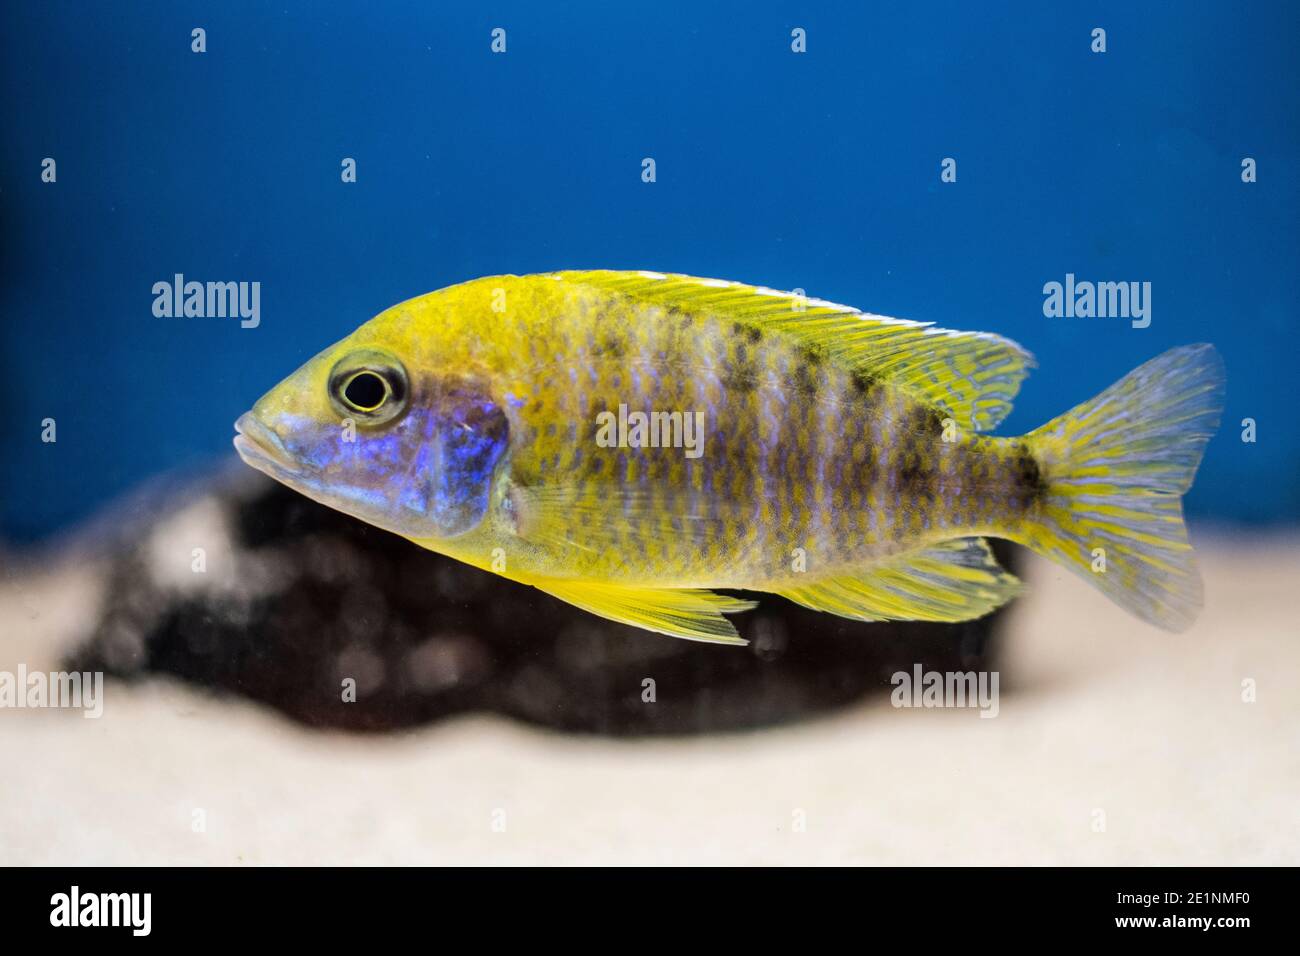 Fish the Yellow Peacock cichlid, Aulonocara baenschi from Lake Malawi in freshwater aquarium Stock Photo